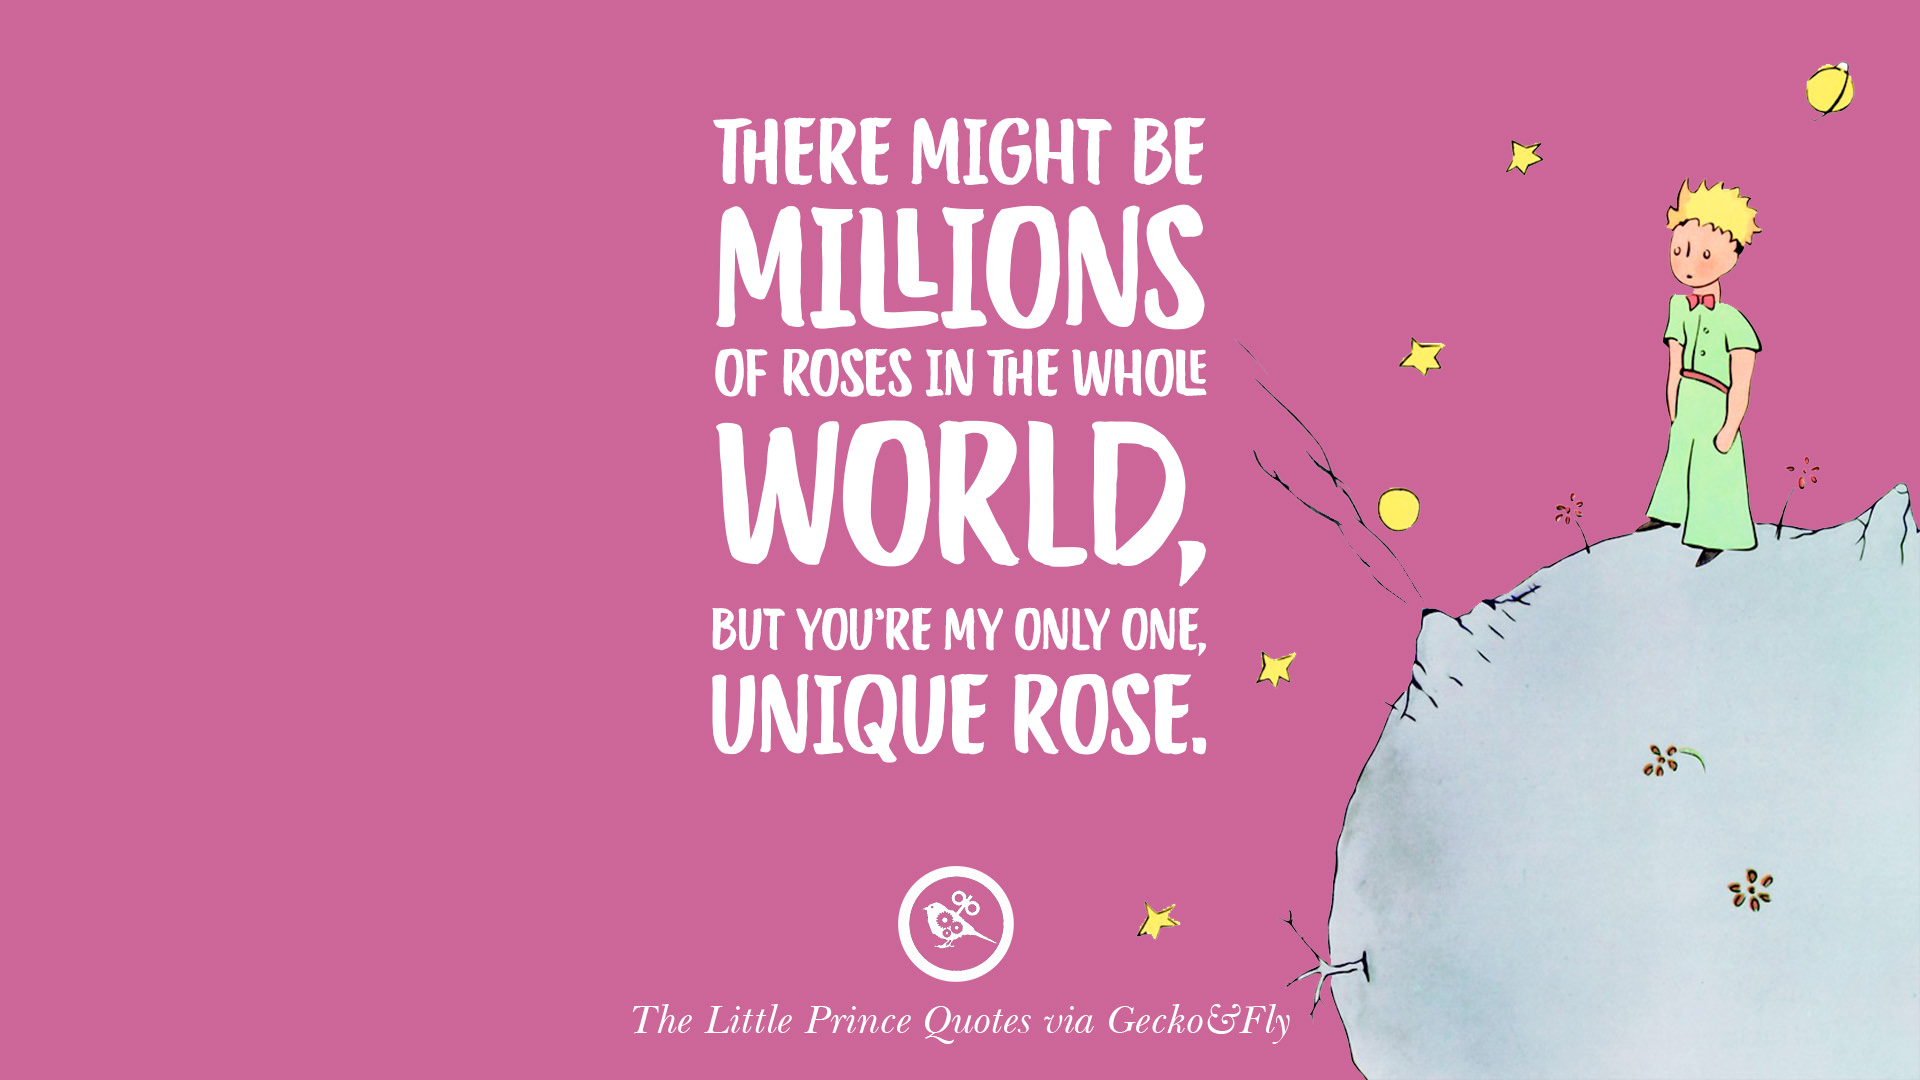 12 Quotes By The Little Prince On Life Lesson, True Love, And Responsibilities